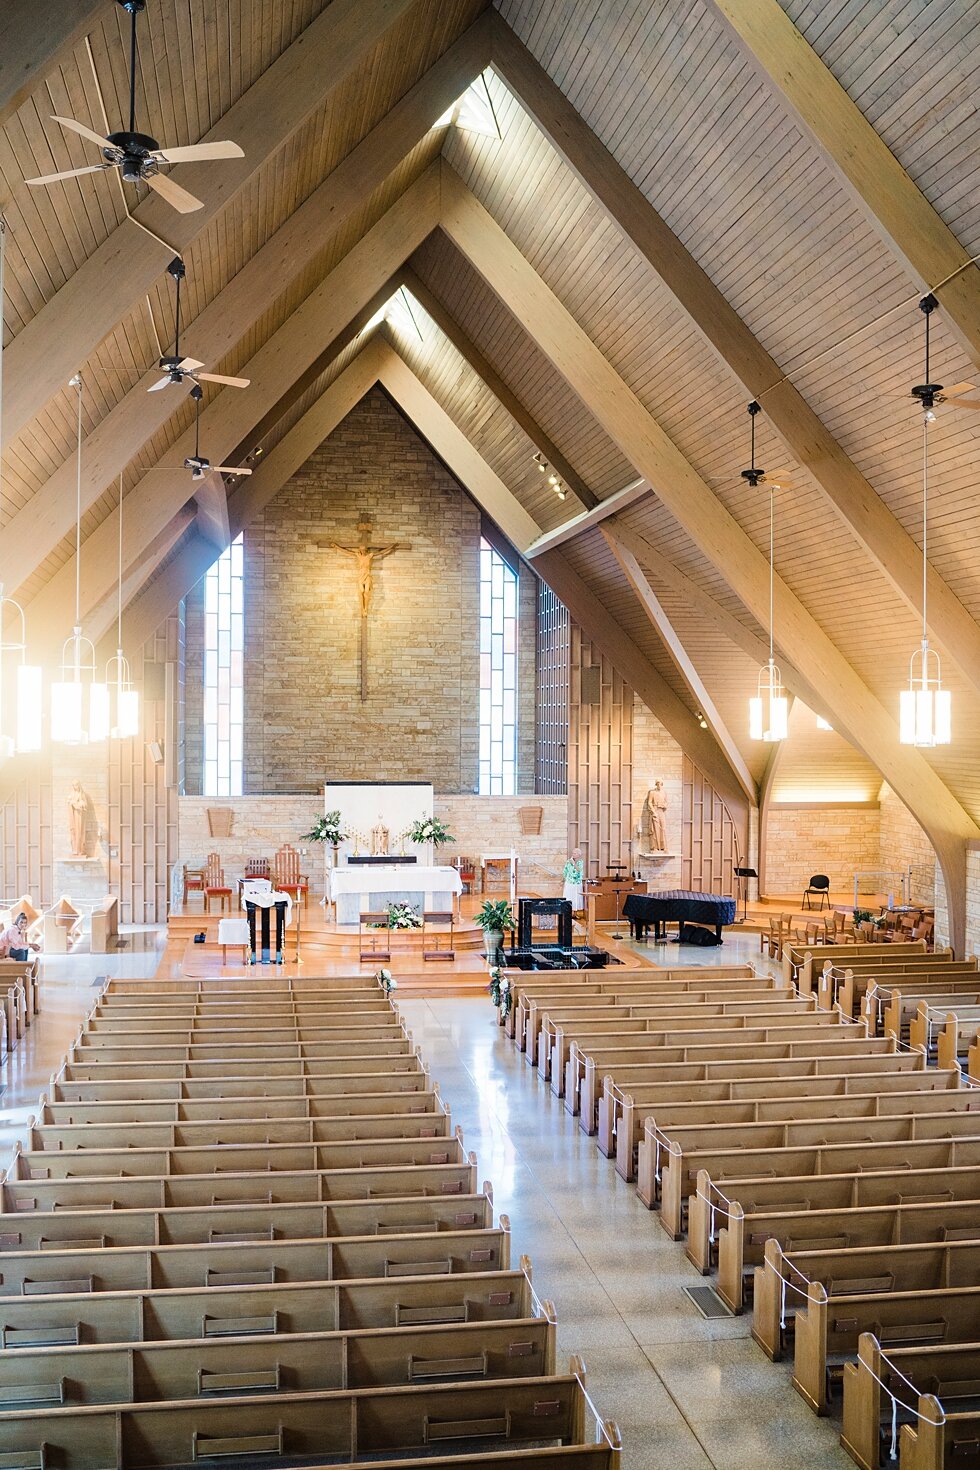  Wedding aisle of our lady of perpetual help in new albany indiana prepared for this wedding ceremony. wedding ceremony details stunning photography married midwest louisville kentucky #weddingphoto #love #justmarried #midwestphotographer #kywedding 